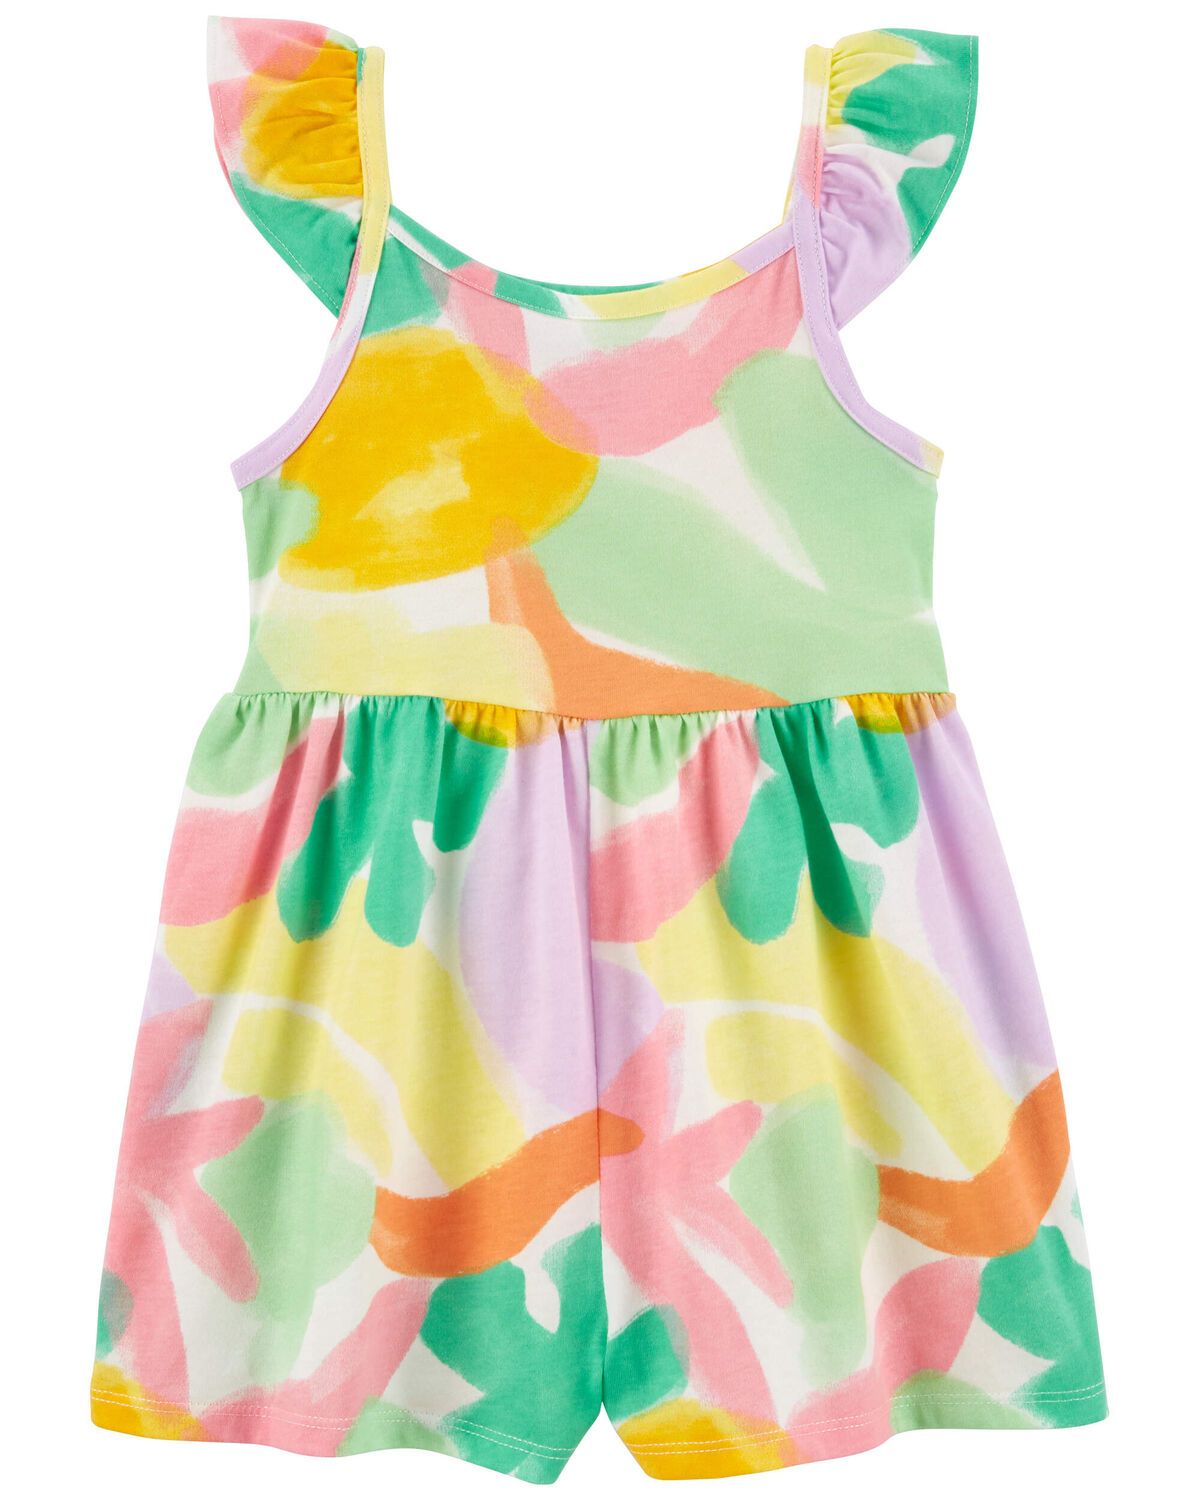 Toddler Abstract Print Cotton Romper | Carter's